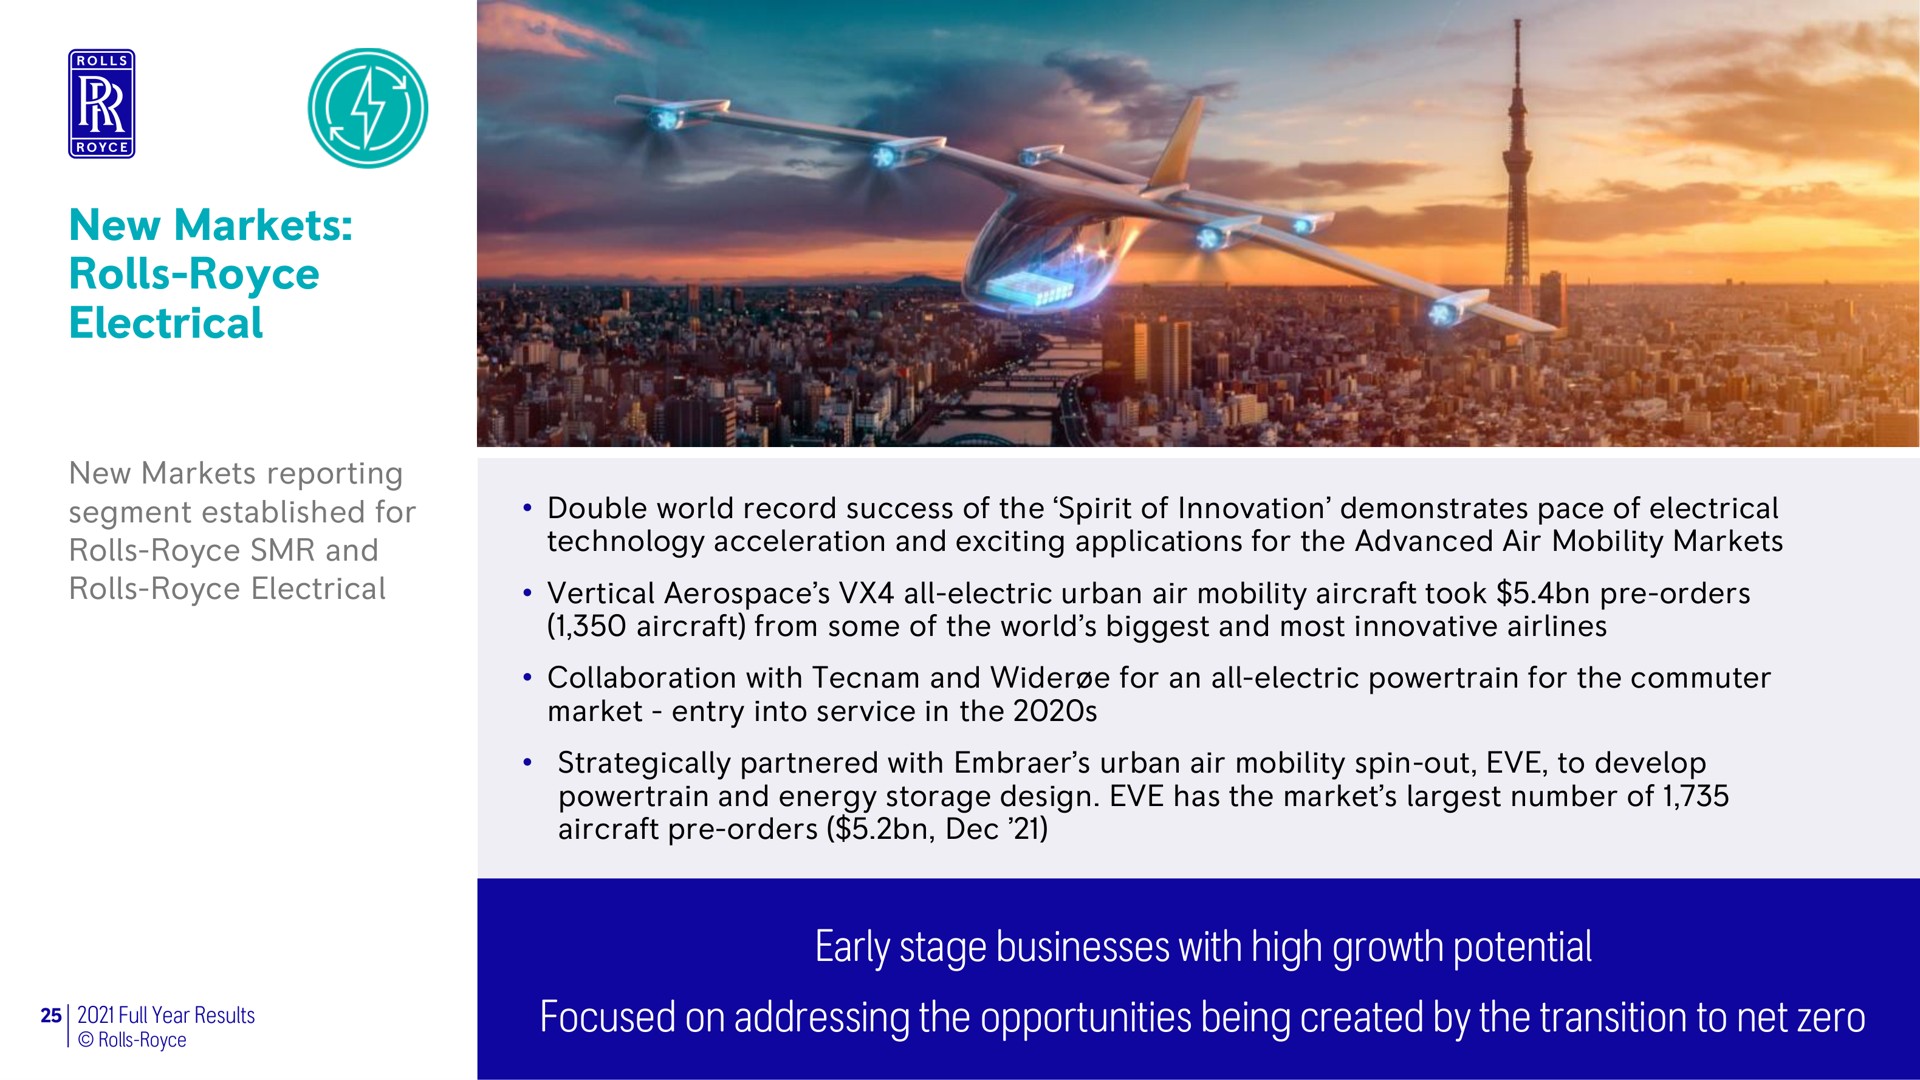 new markets rolls electrical focused on addressing the opportunities being created by the transition to net zero early stage businesses with high growth potential | Rolls-Royce Holdings